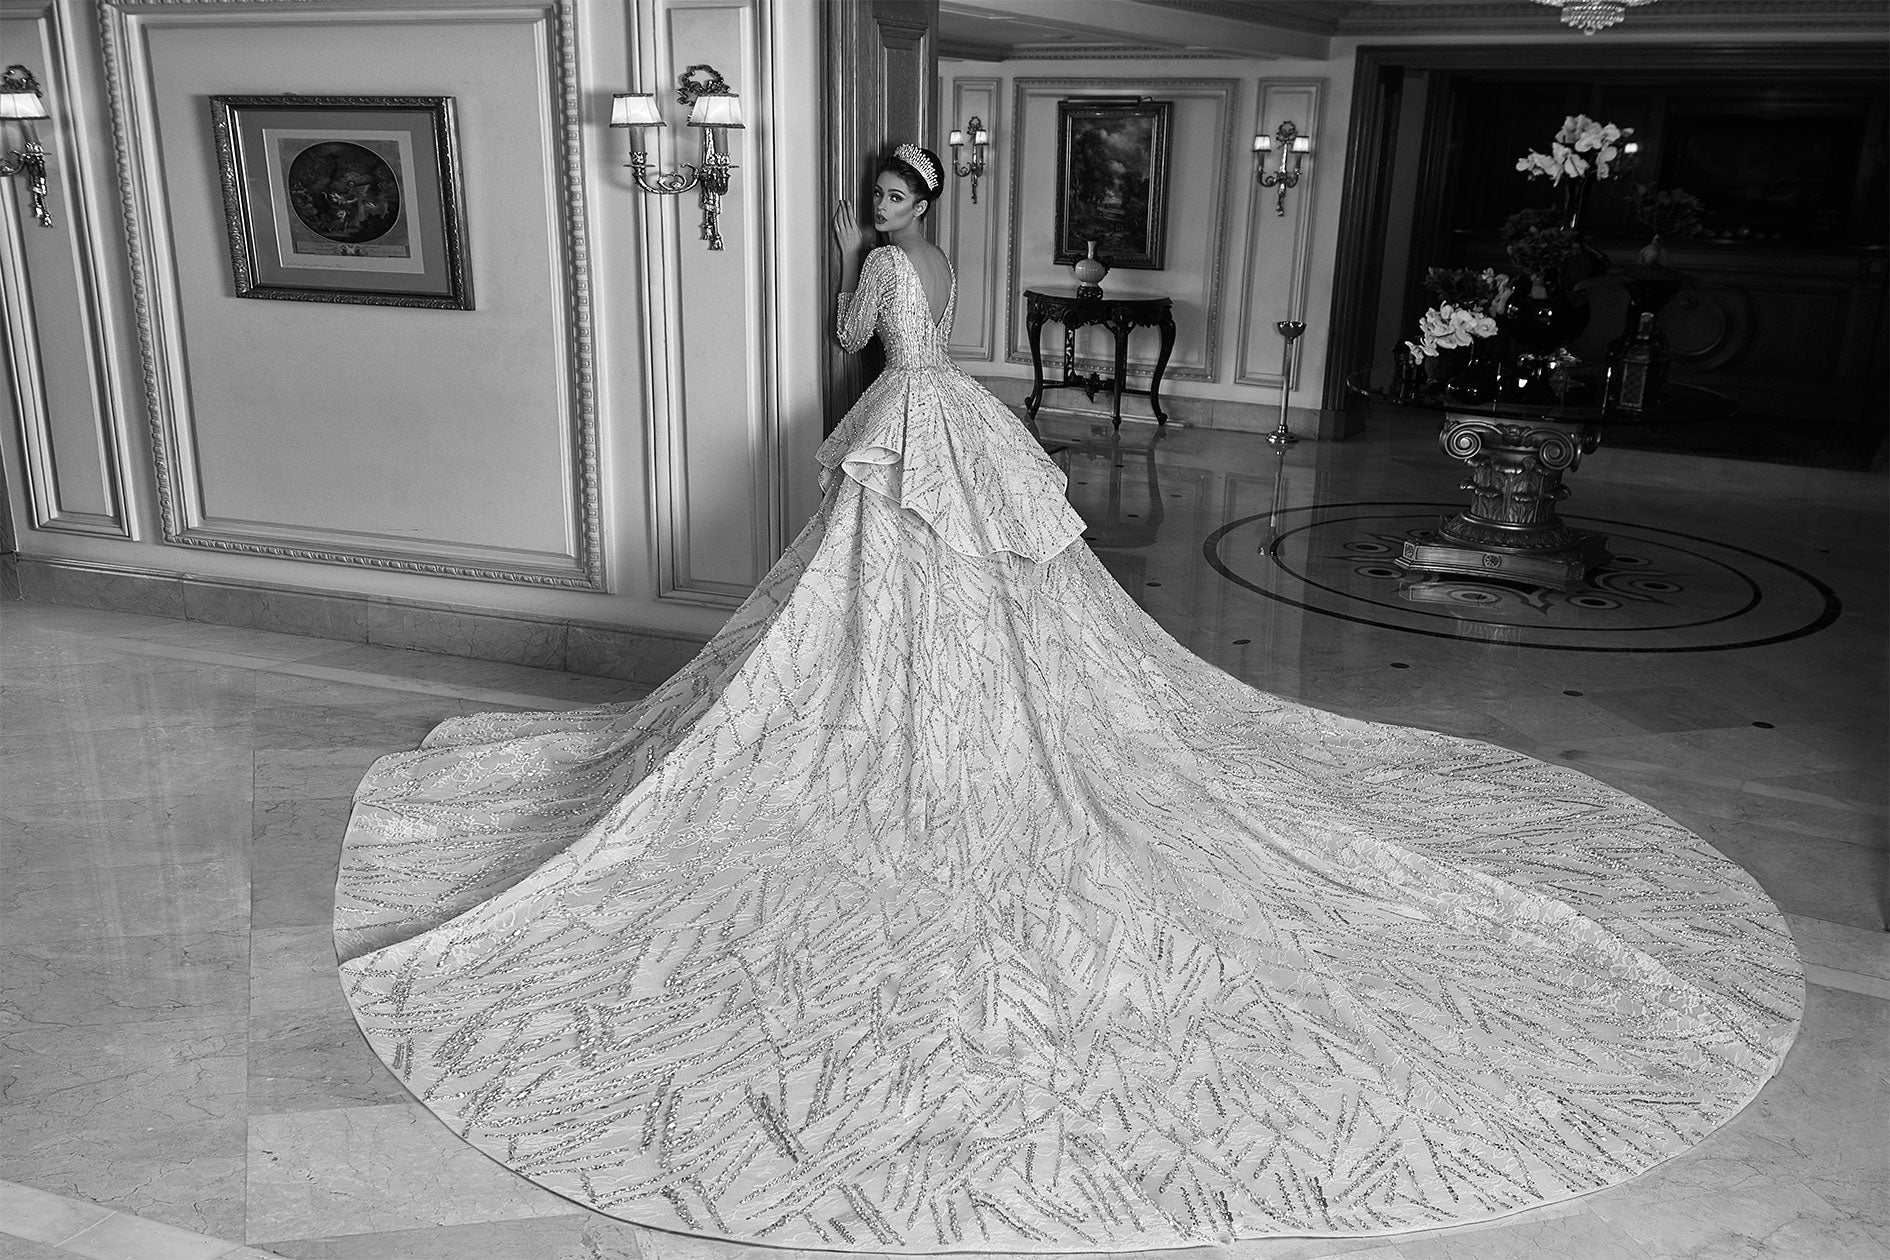 Diana, Princess Inspired Ball Gown Embroidered With Precious Crystals